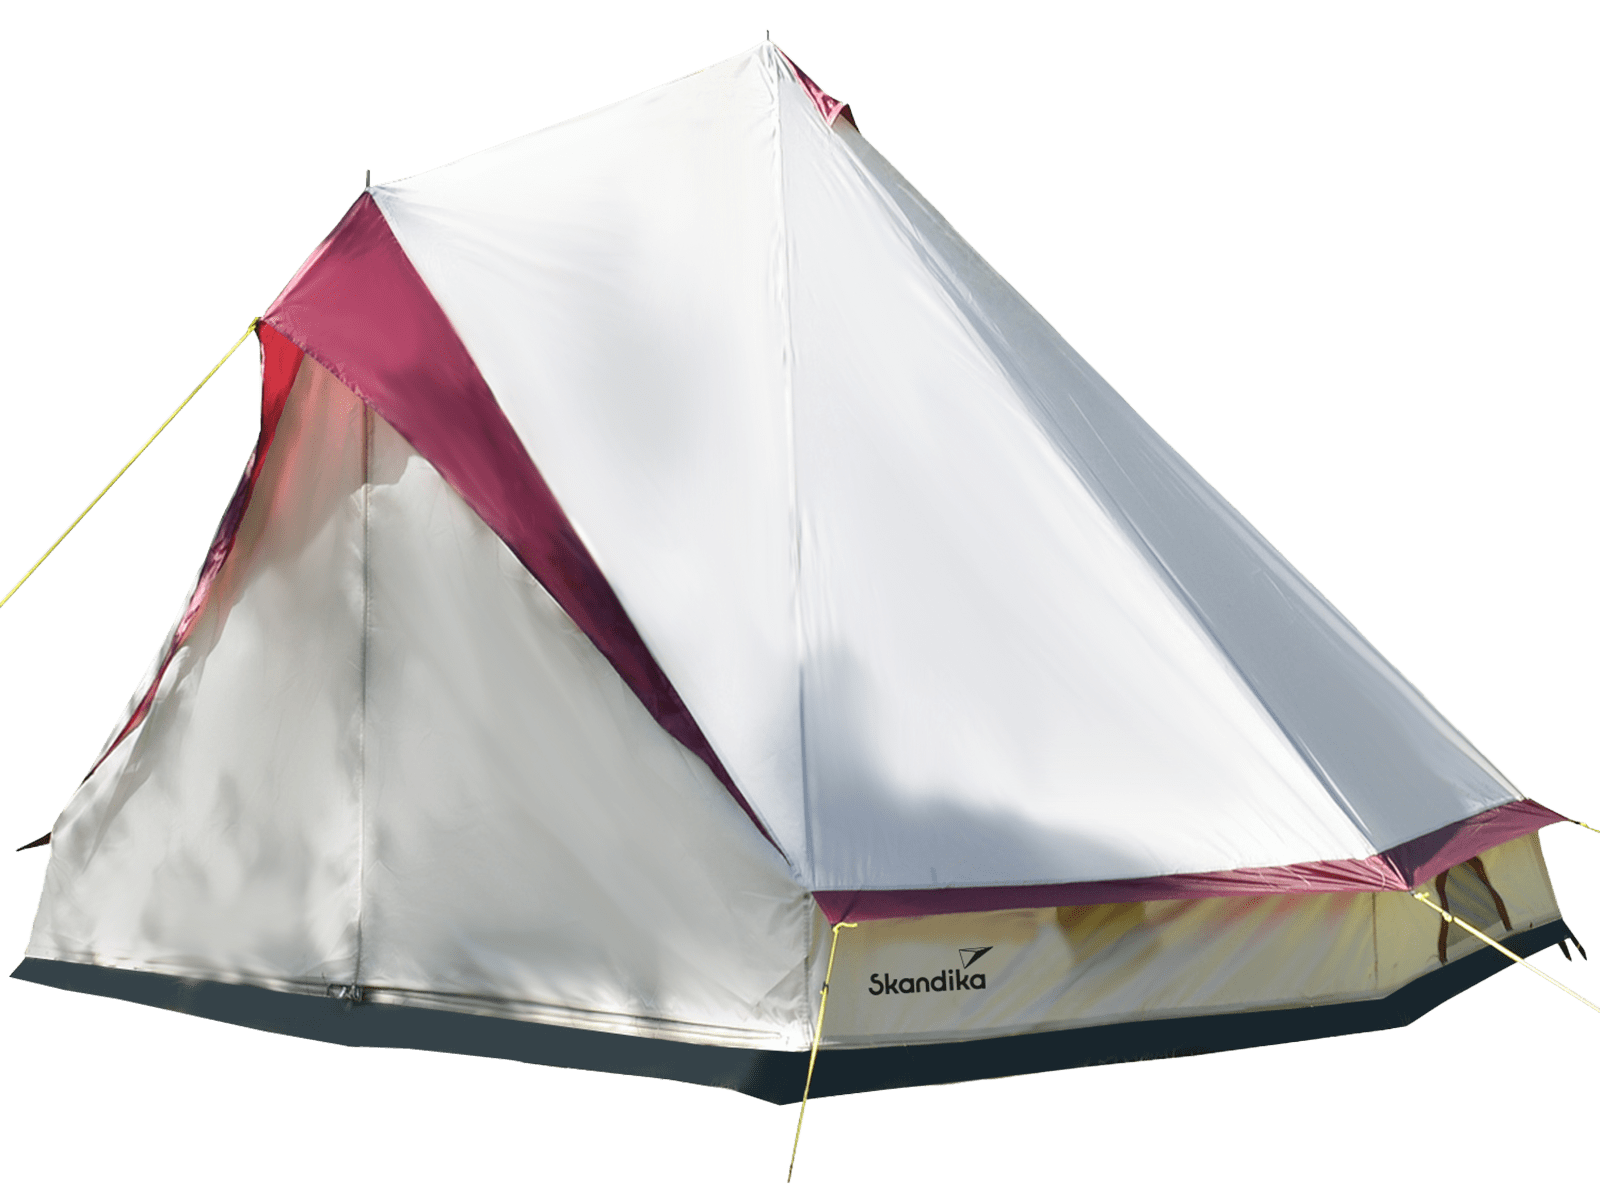 skandika Comanche Tipi Teepee 8 Person/Man Camping Tent Large Sewn-in Floor New